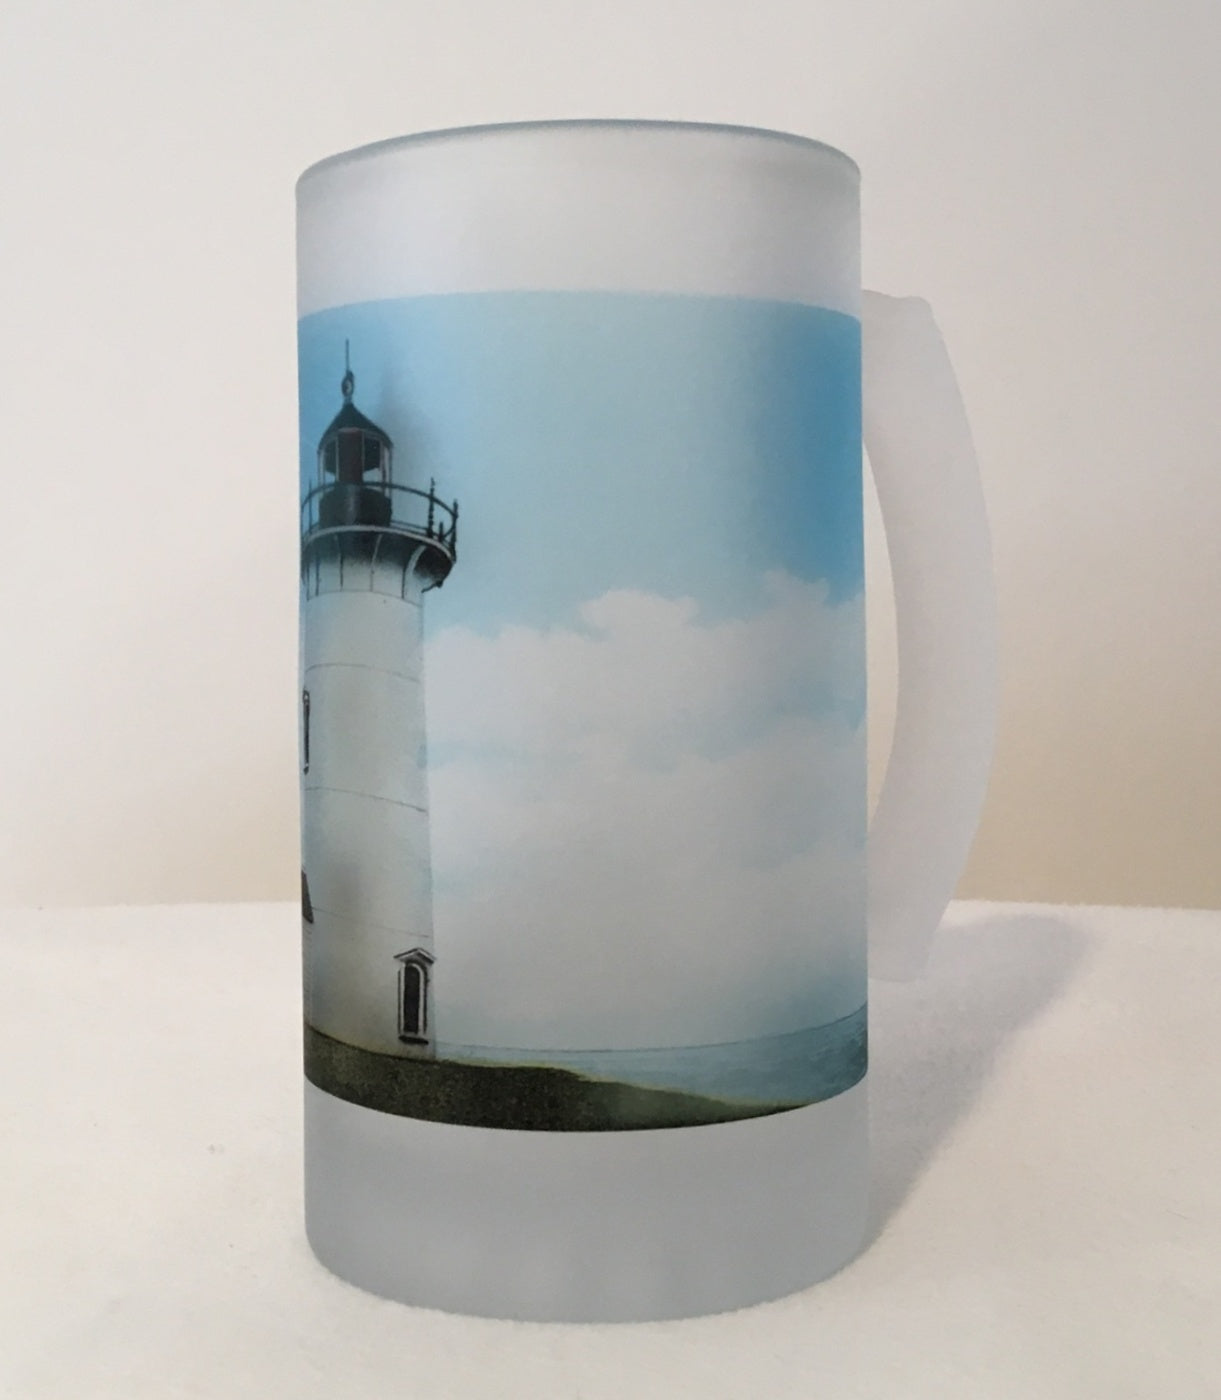 Colorful Frosted Glass Mug of Nobska Light in Falmouth, MA on Cape Cod - That Fabled Shore Home Decor